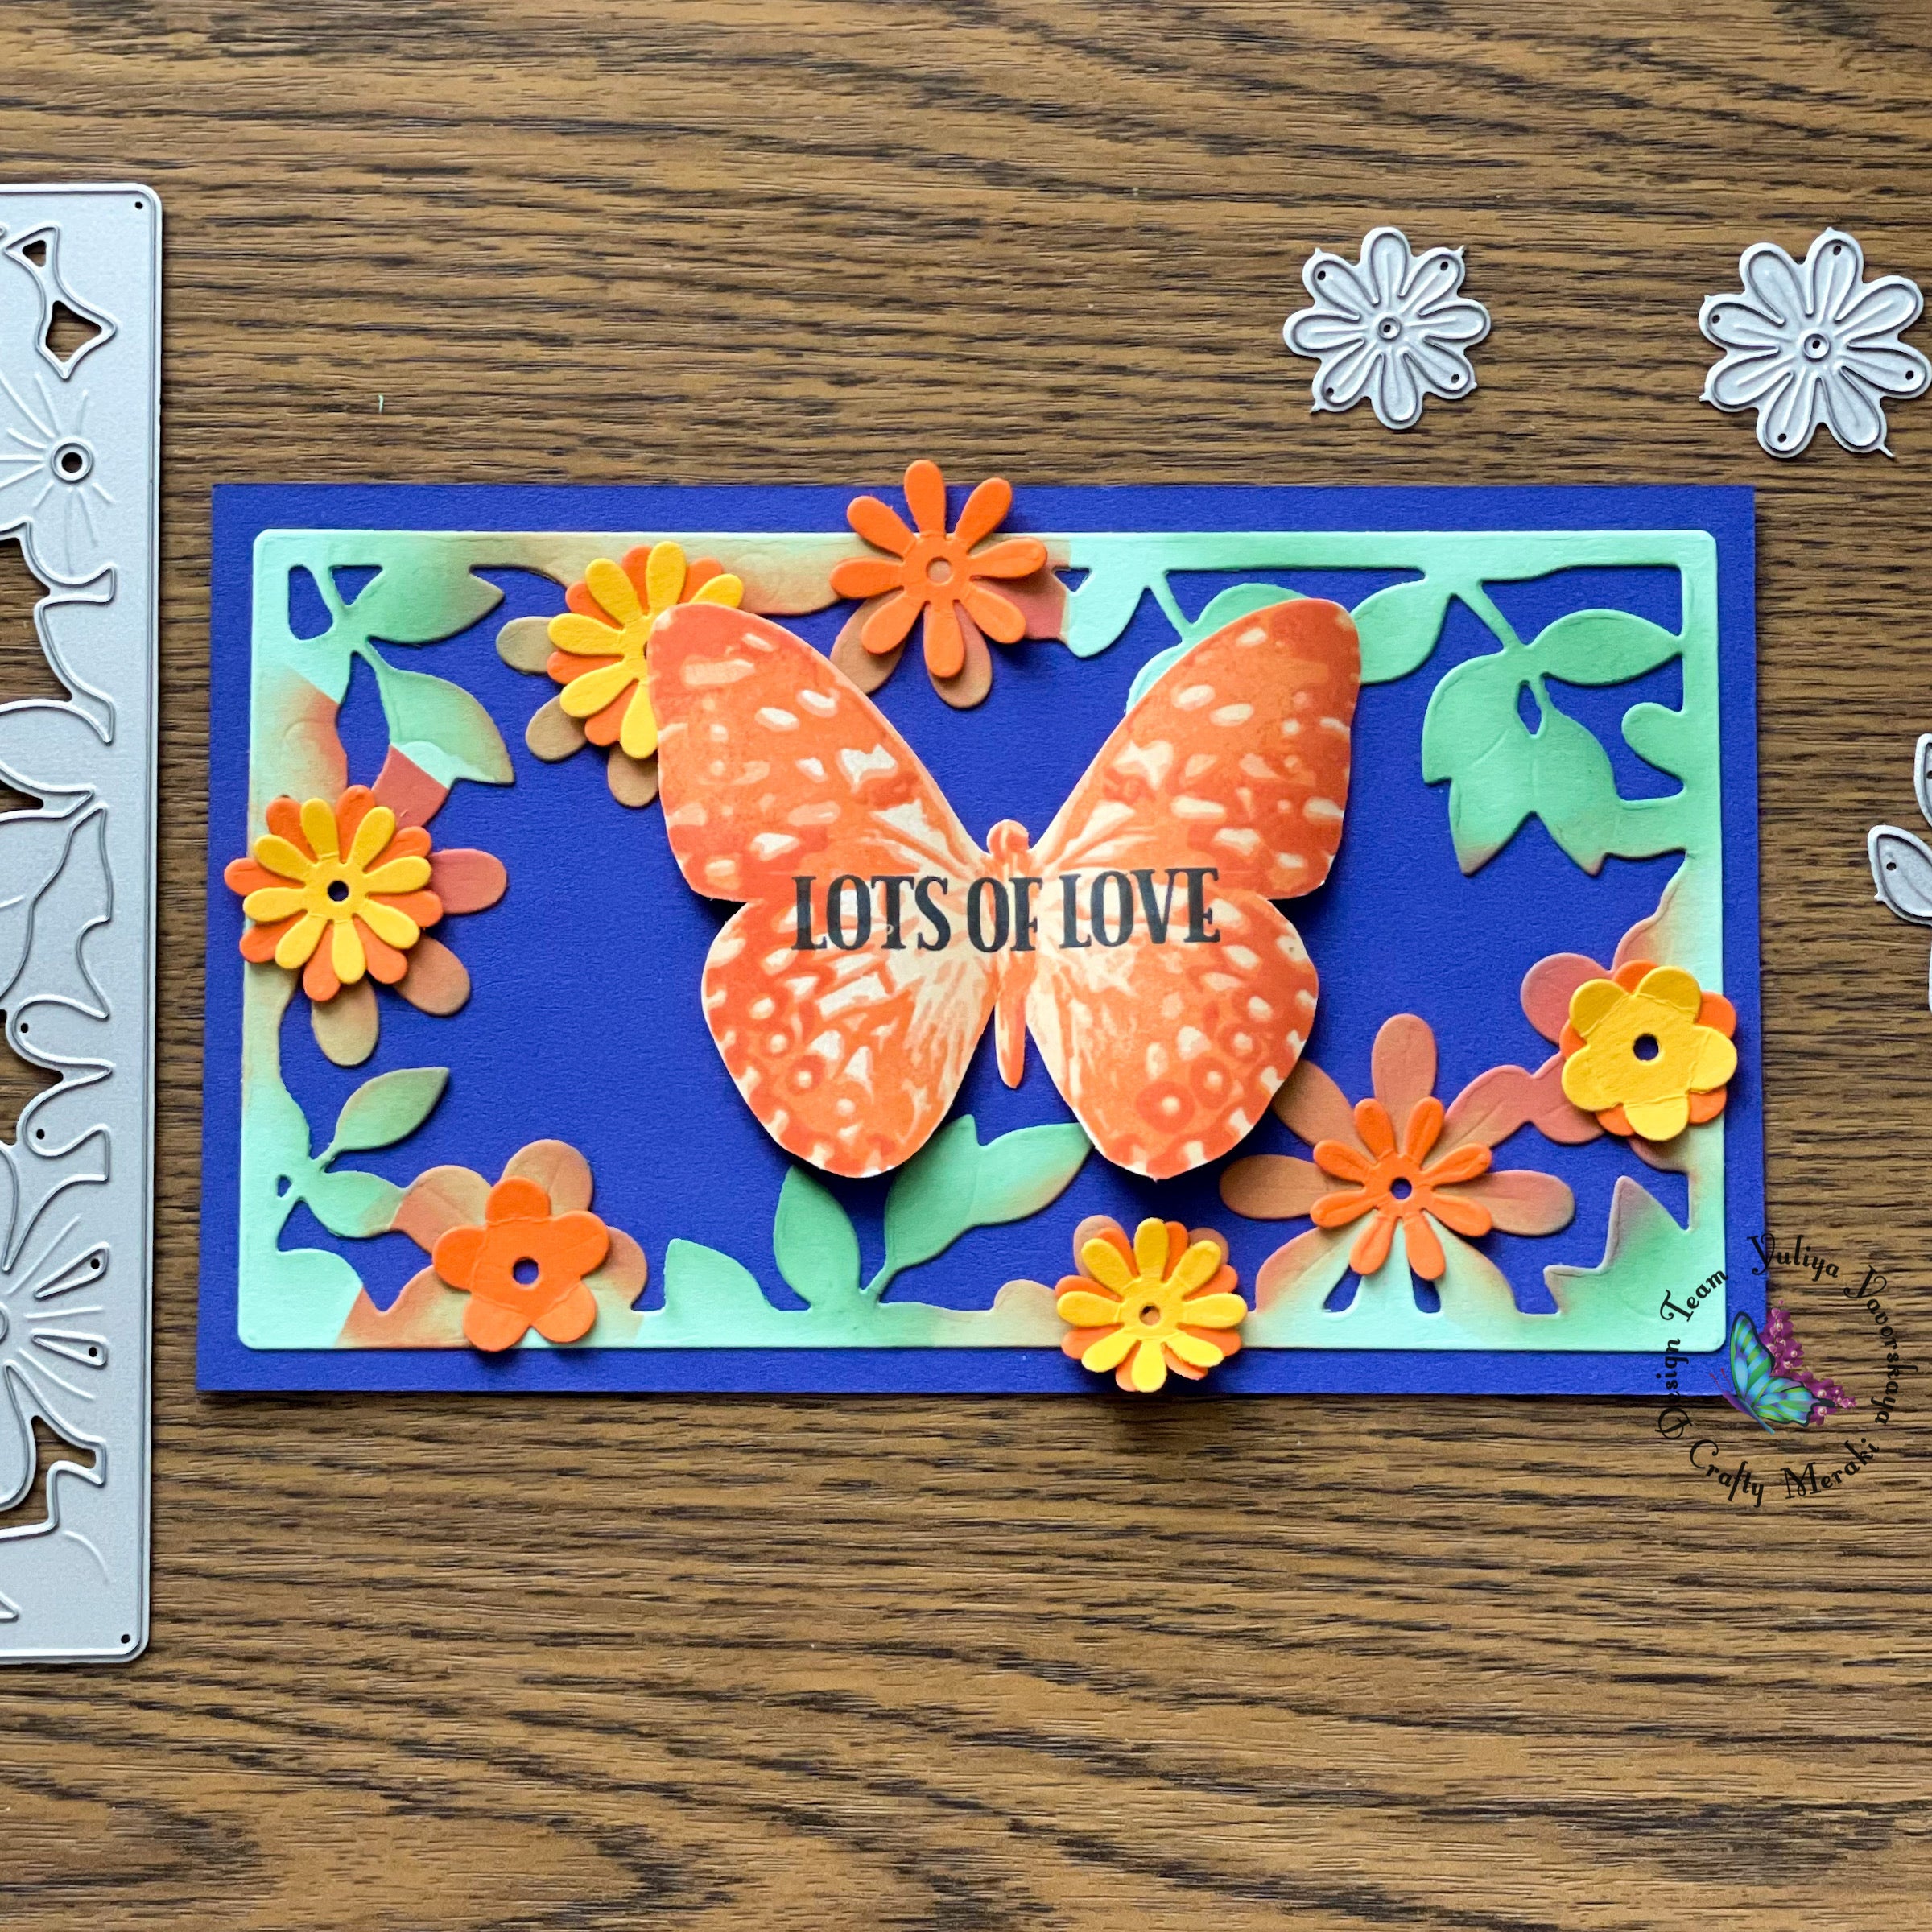 Bright Floral card and a Butterfly from Yuliya